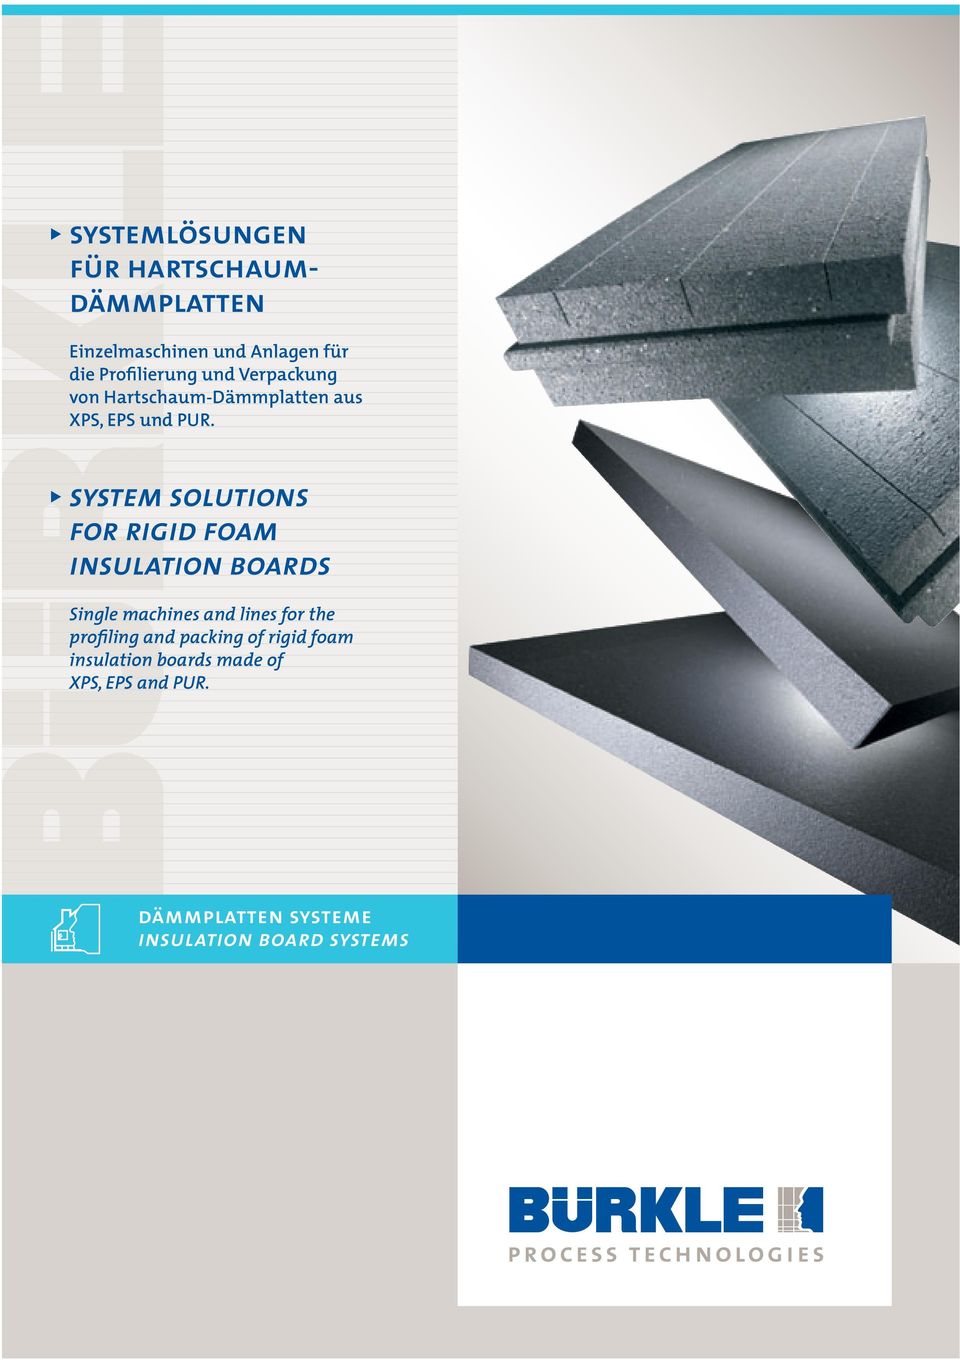 system solutions for rigid foam insulation boards Single machines and lines for the